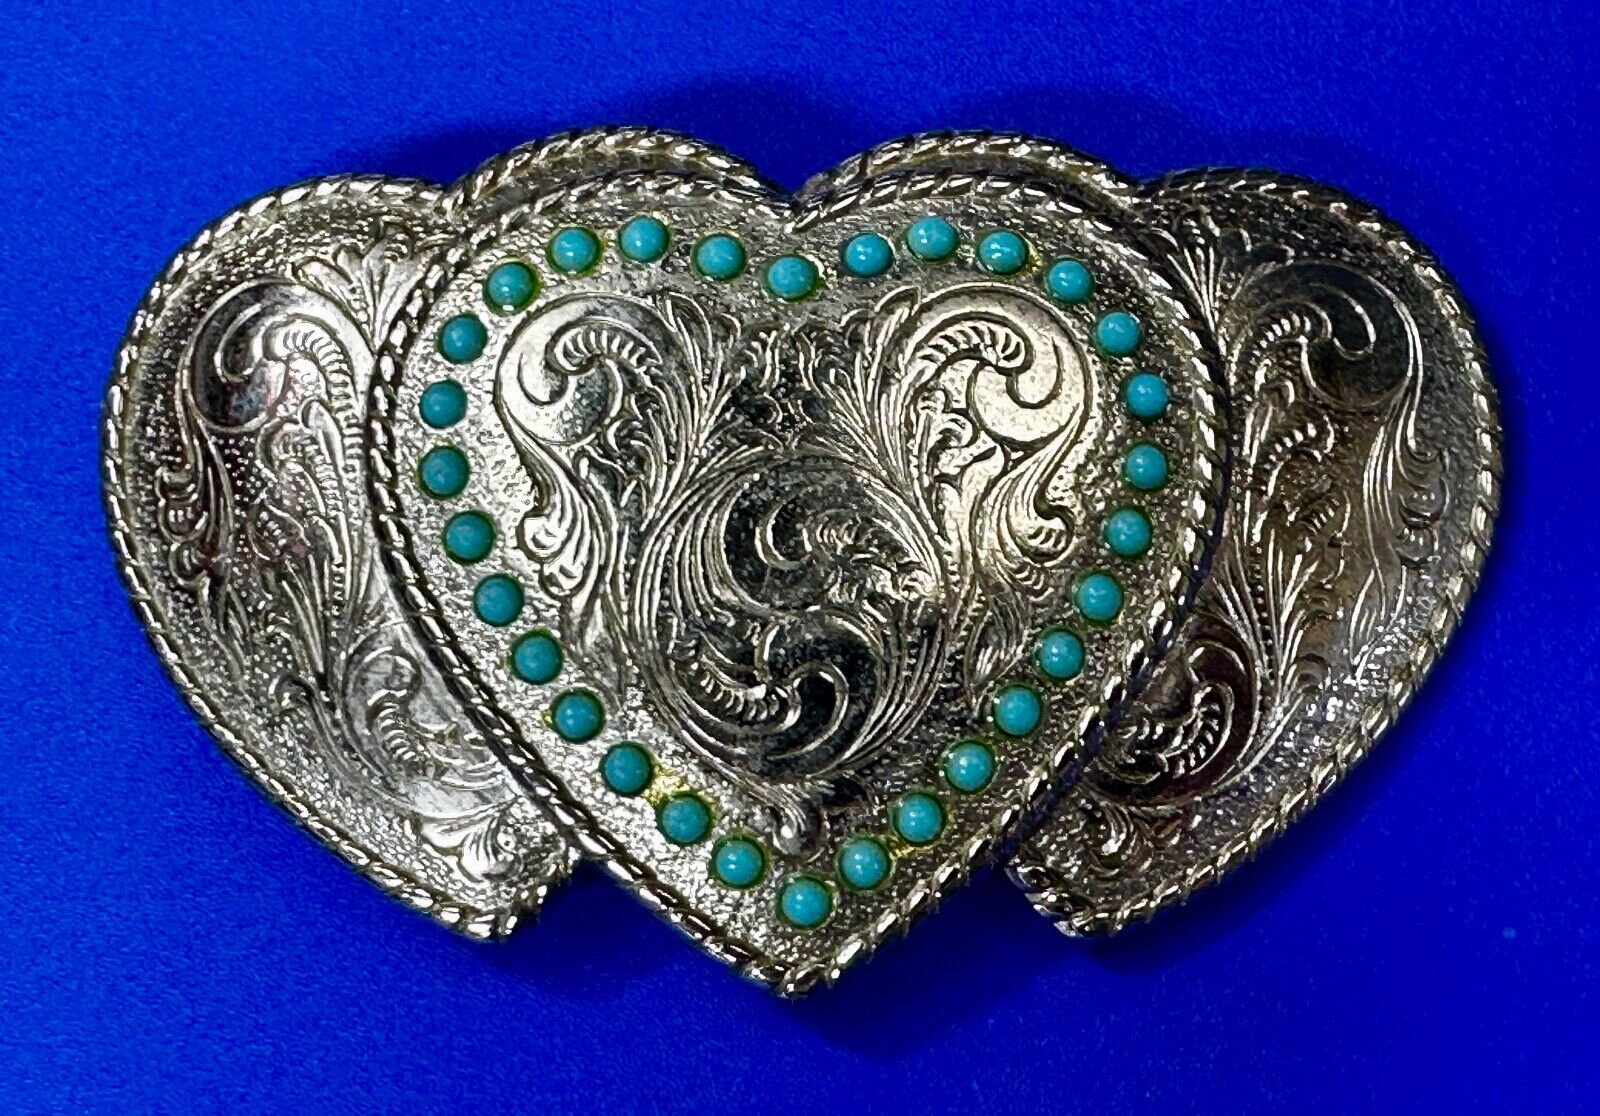 Triple 3 Hearts - Turquoise Colored Accented Or Outlined Three Heart Belt Buckle